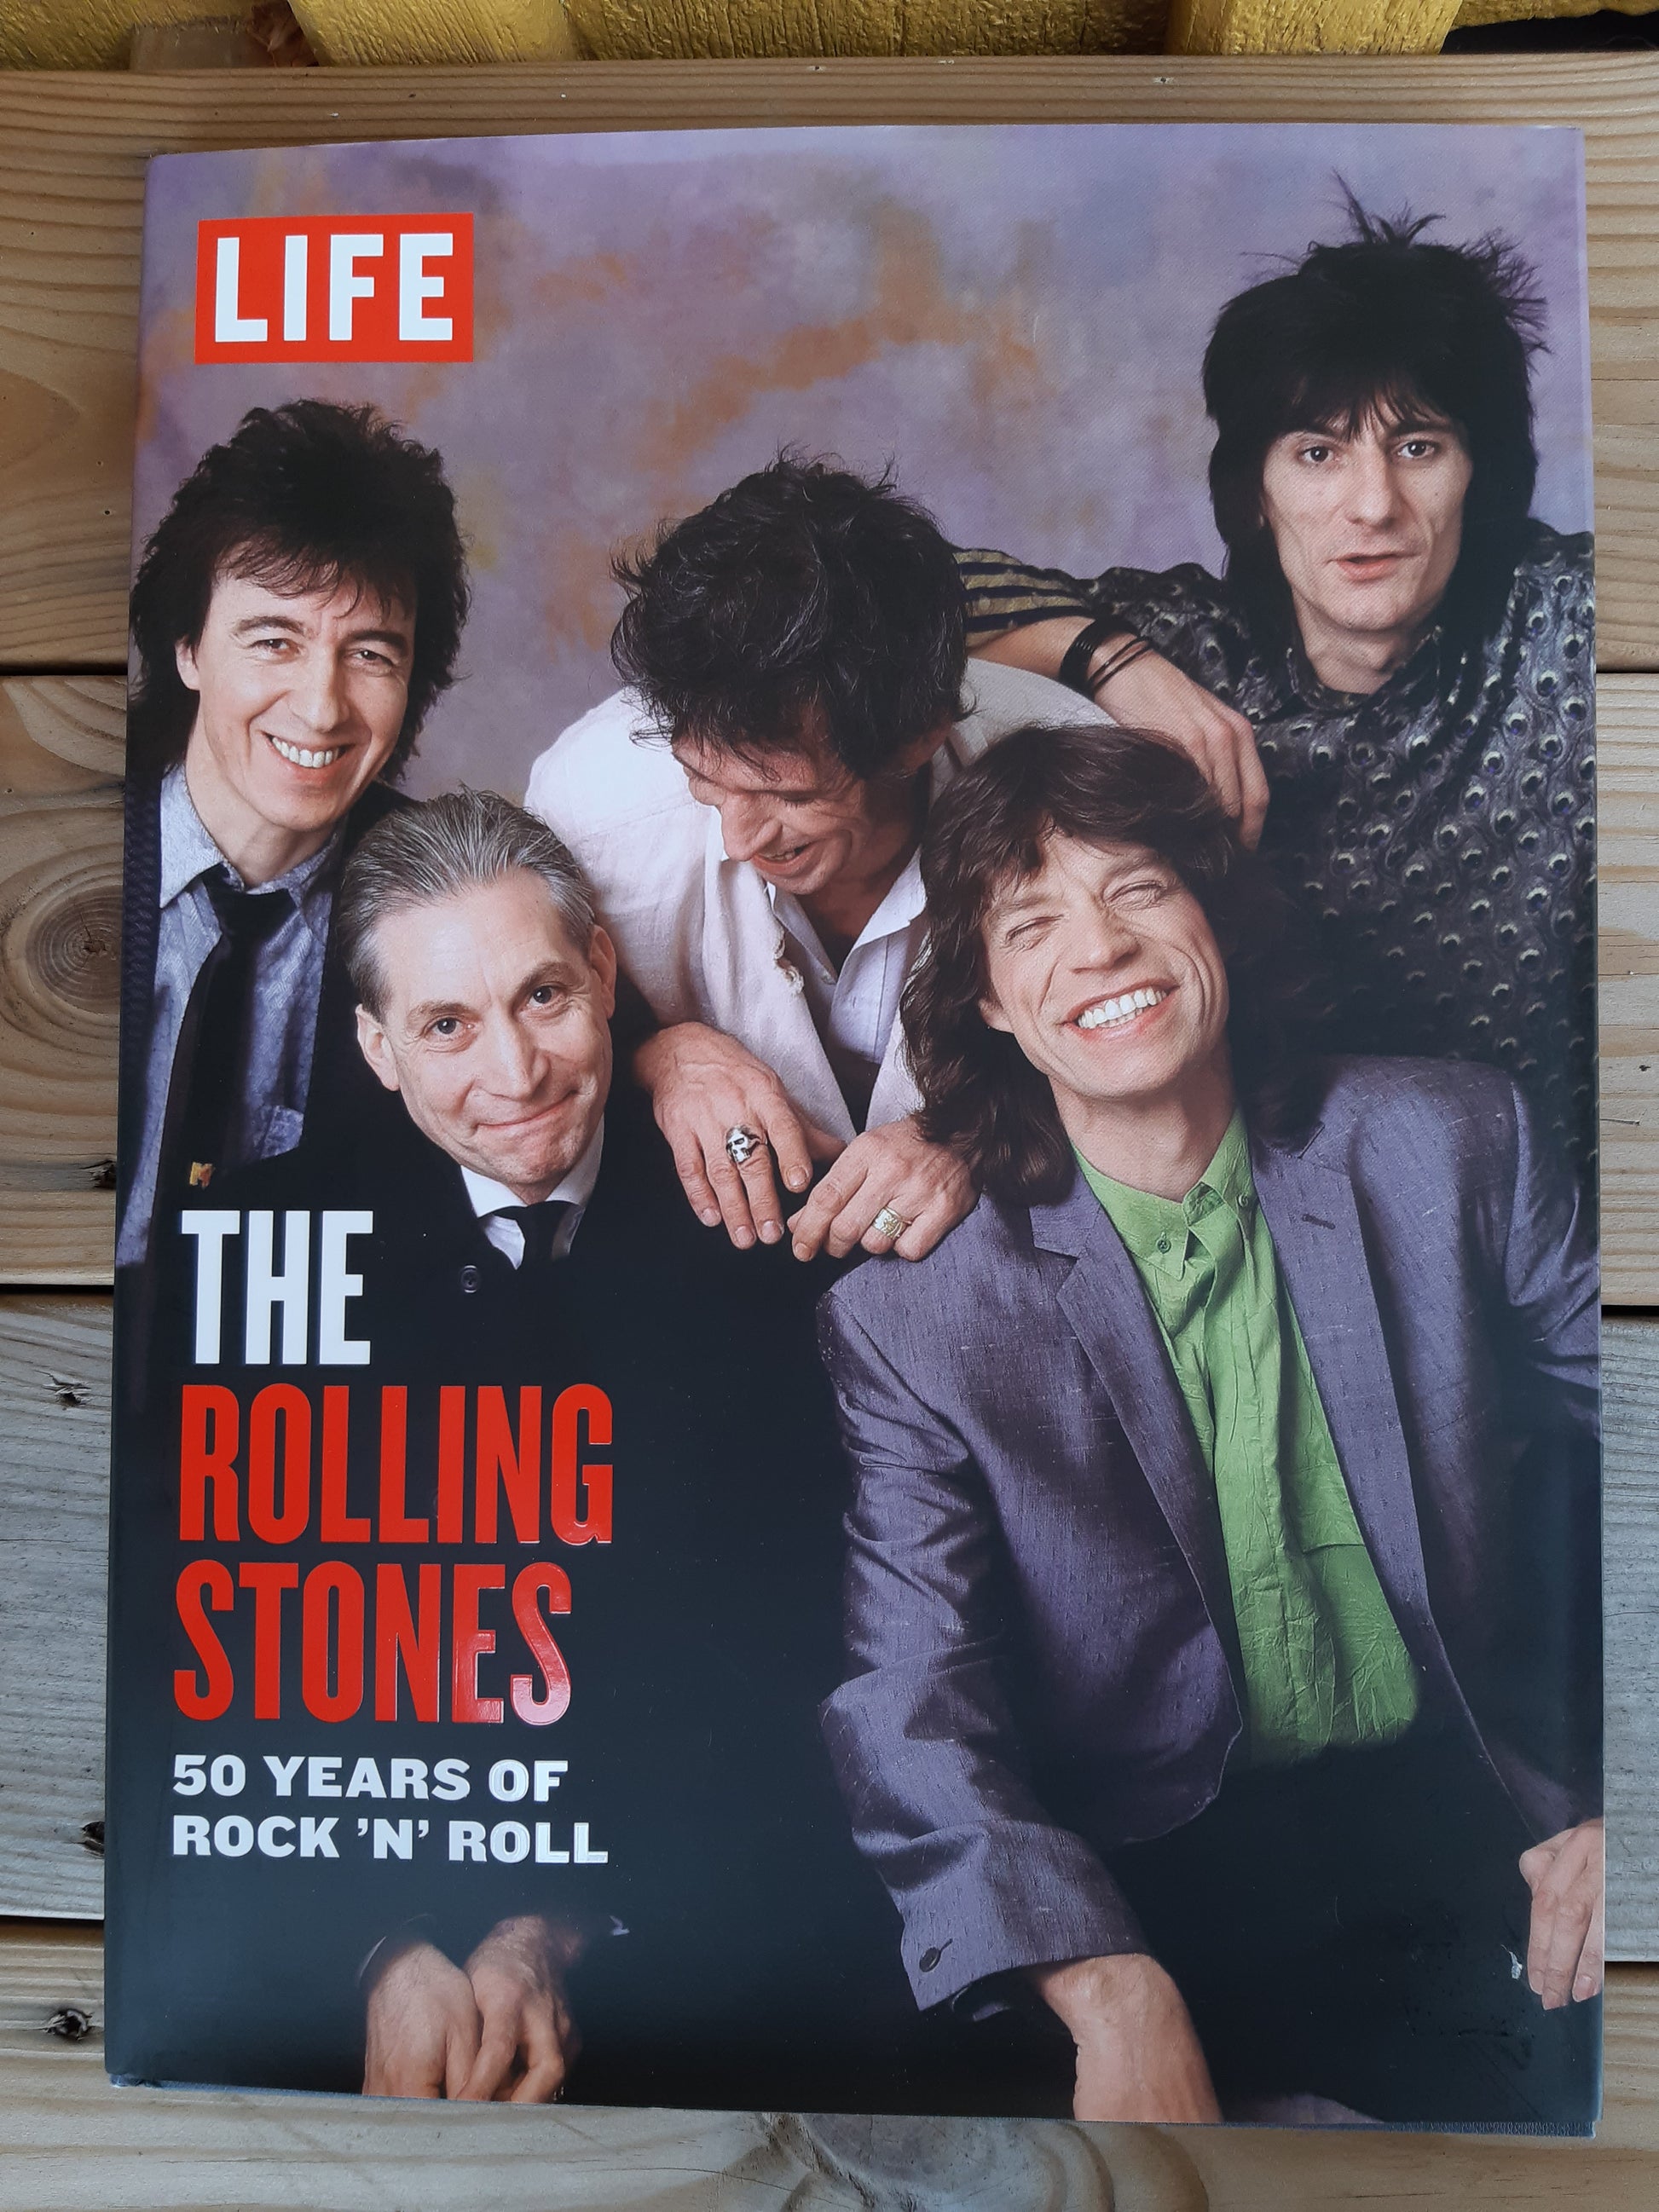 life the rolling stones - 50 years of rock 'n' roll